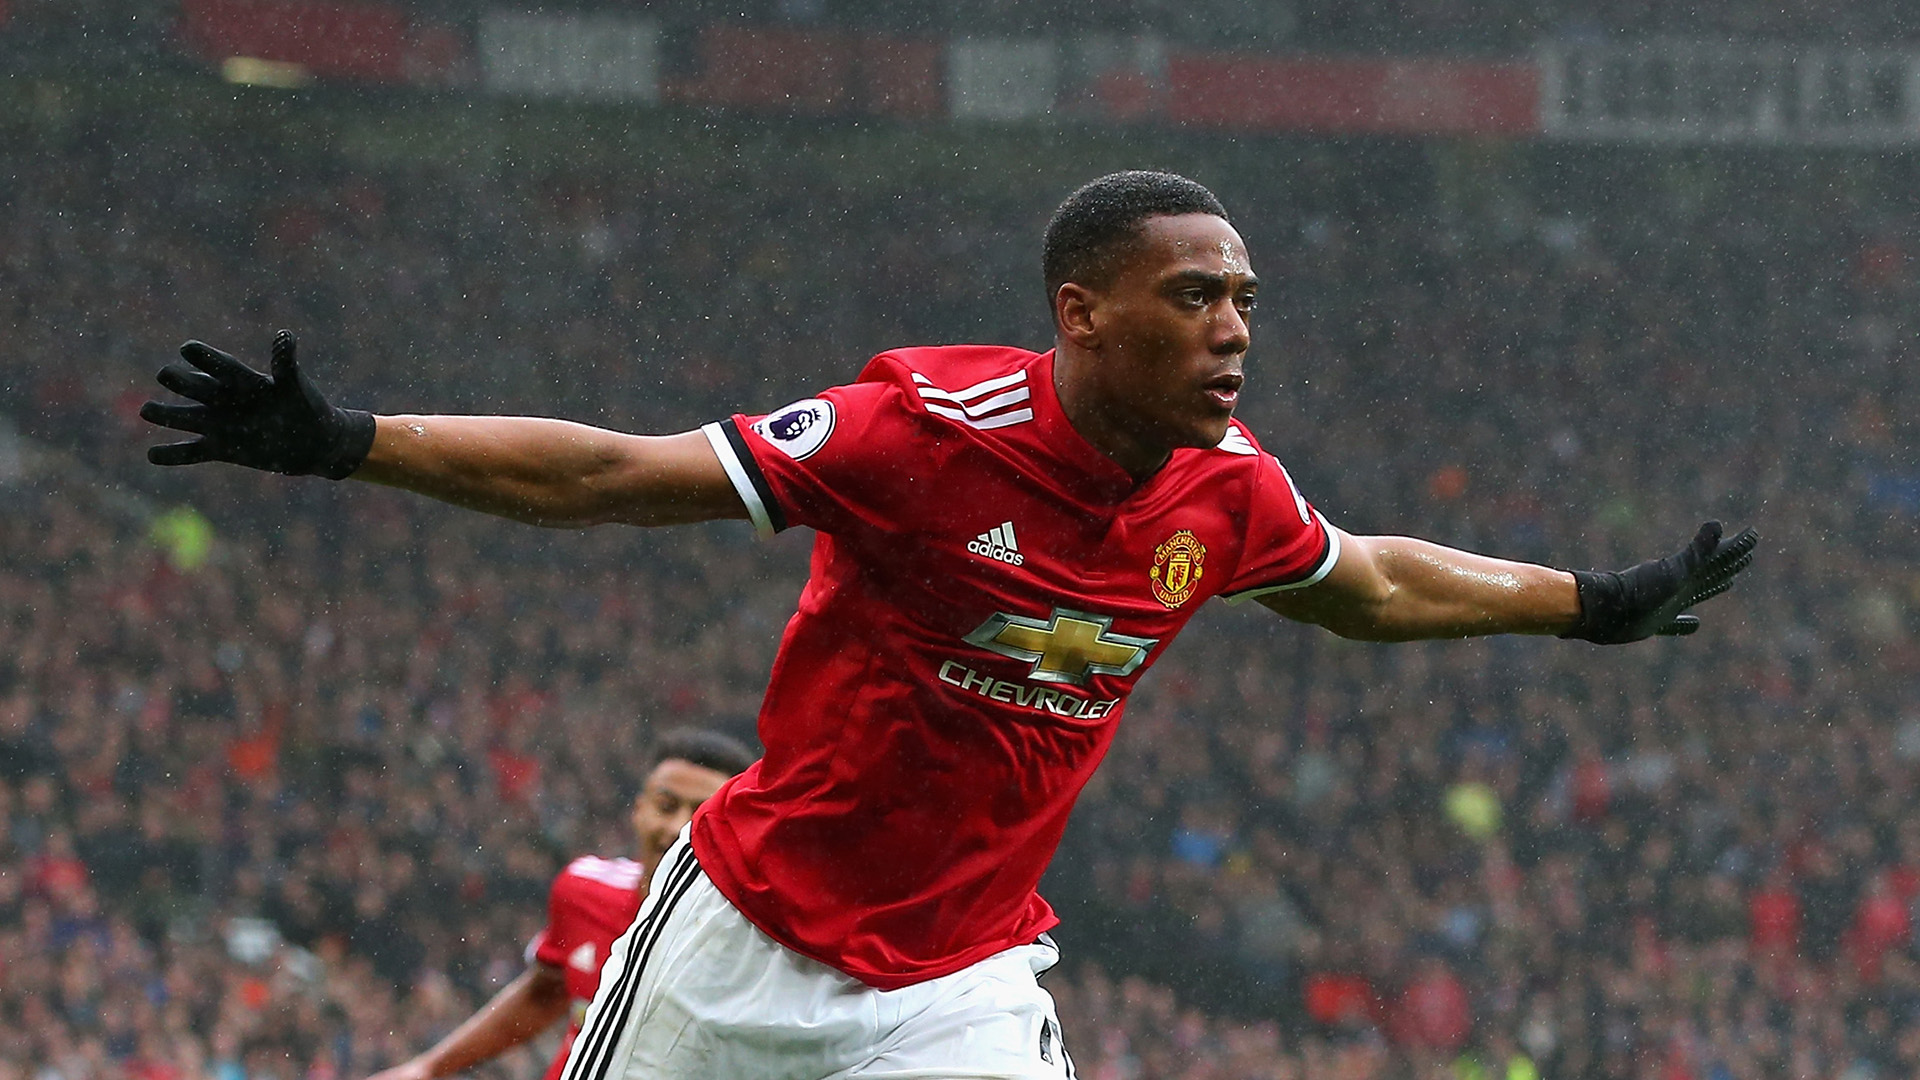 RMC Sport: AC Milan made attempt to sign Man Utd's Martial